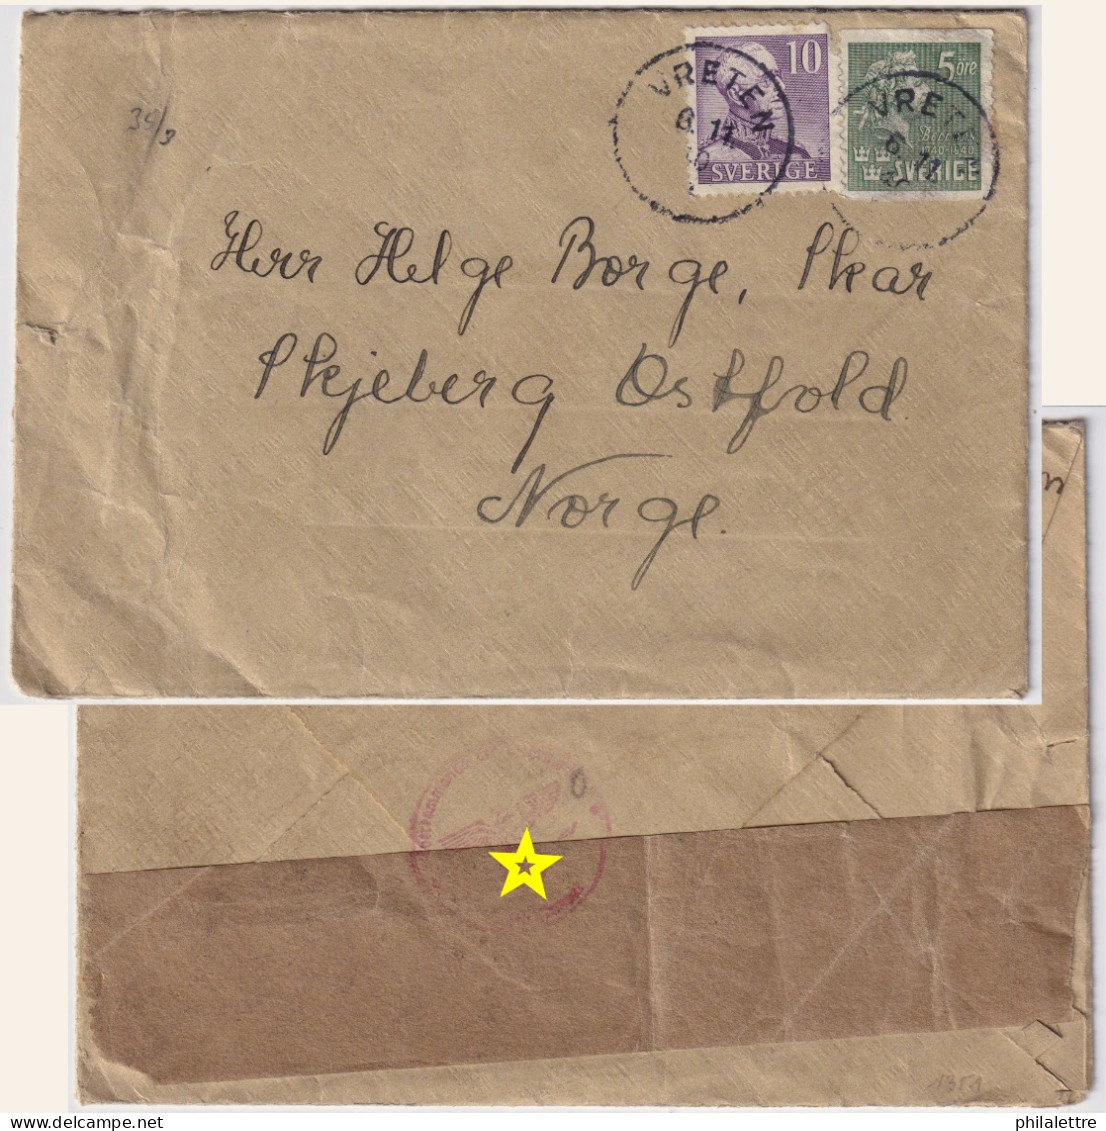 SWEDEN To NORWAY - 1940 - German Censor Tape On Cover From Vreten To Skjeberg - Franked Facit 273C (type II) &324A - Covers & Documents